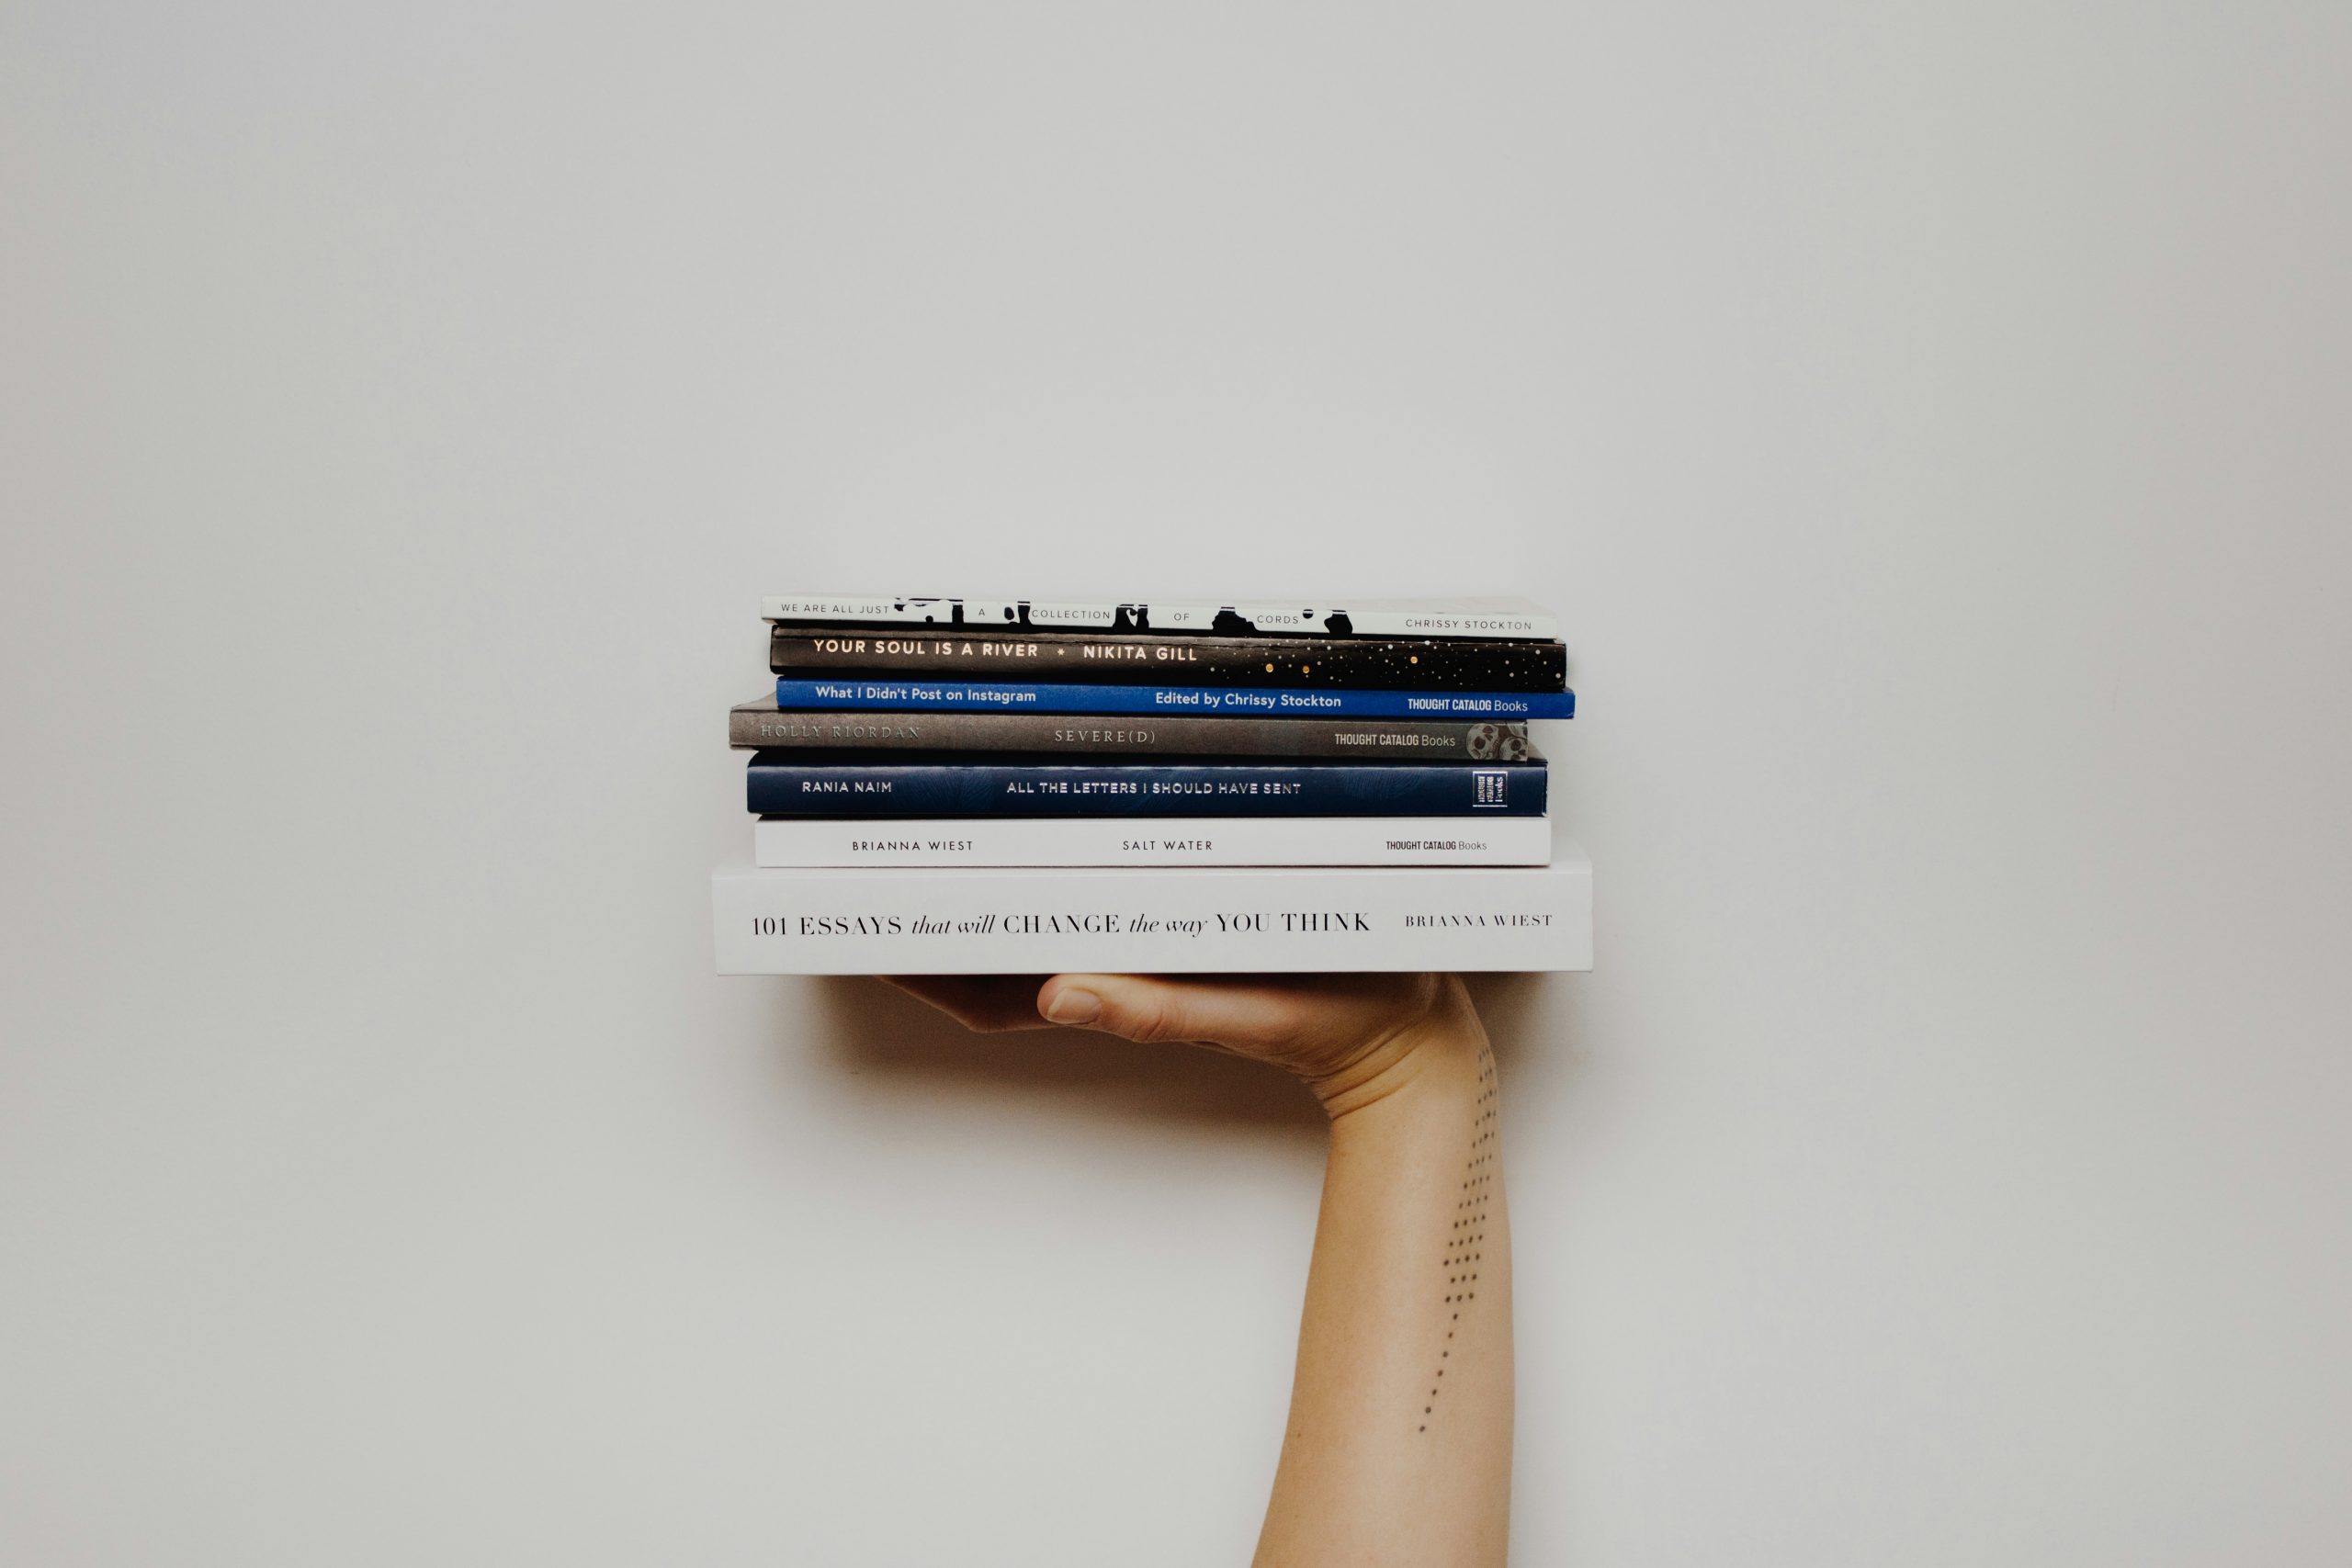 Pile of books on a hand before a white background.